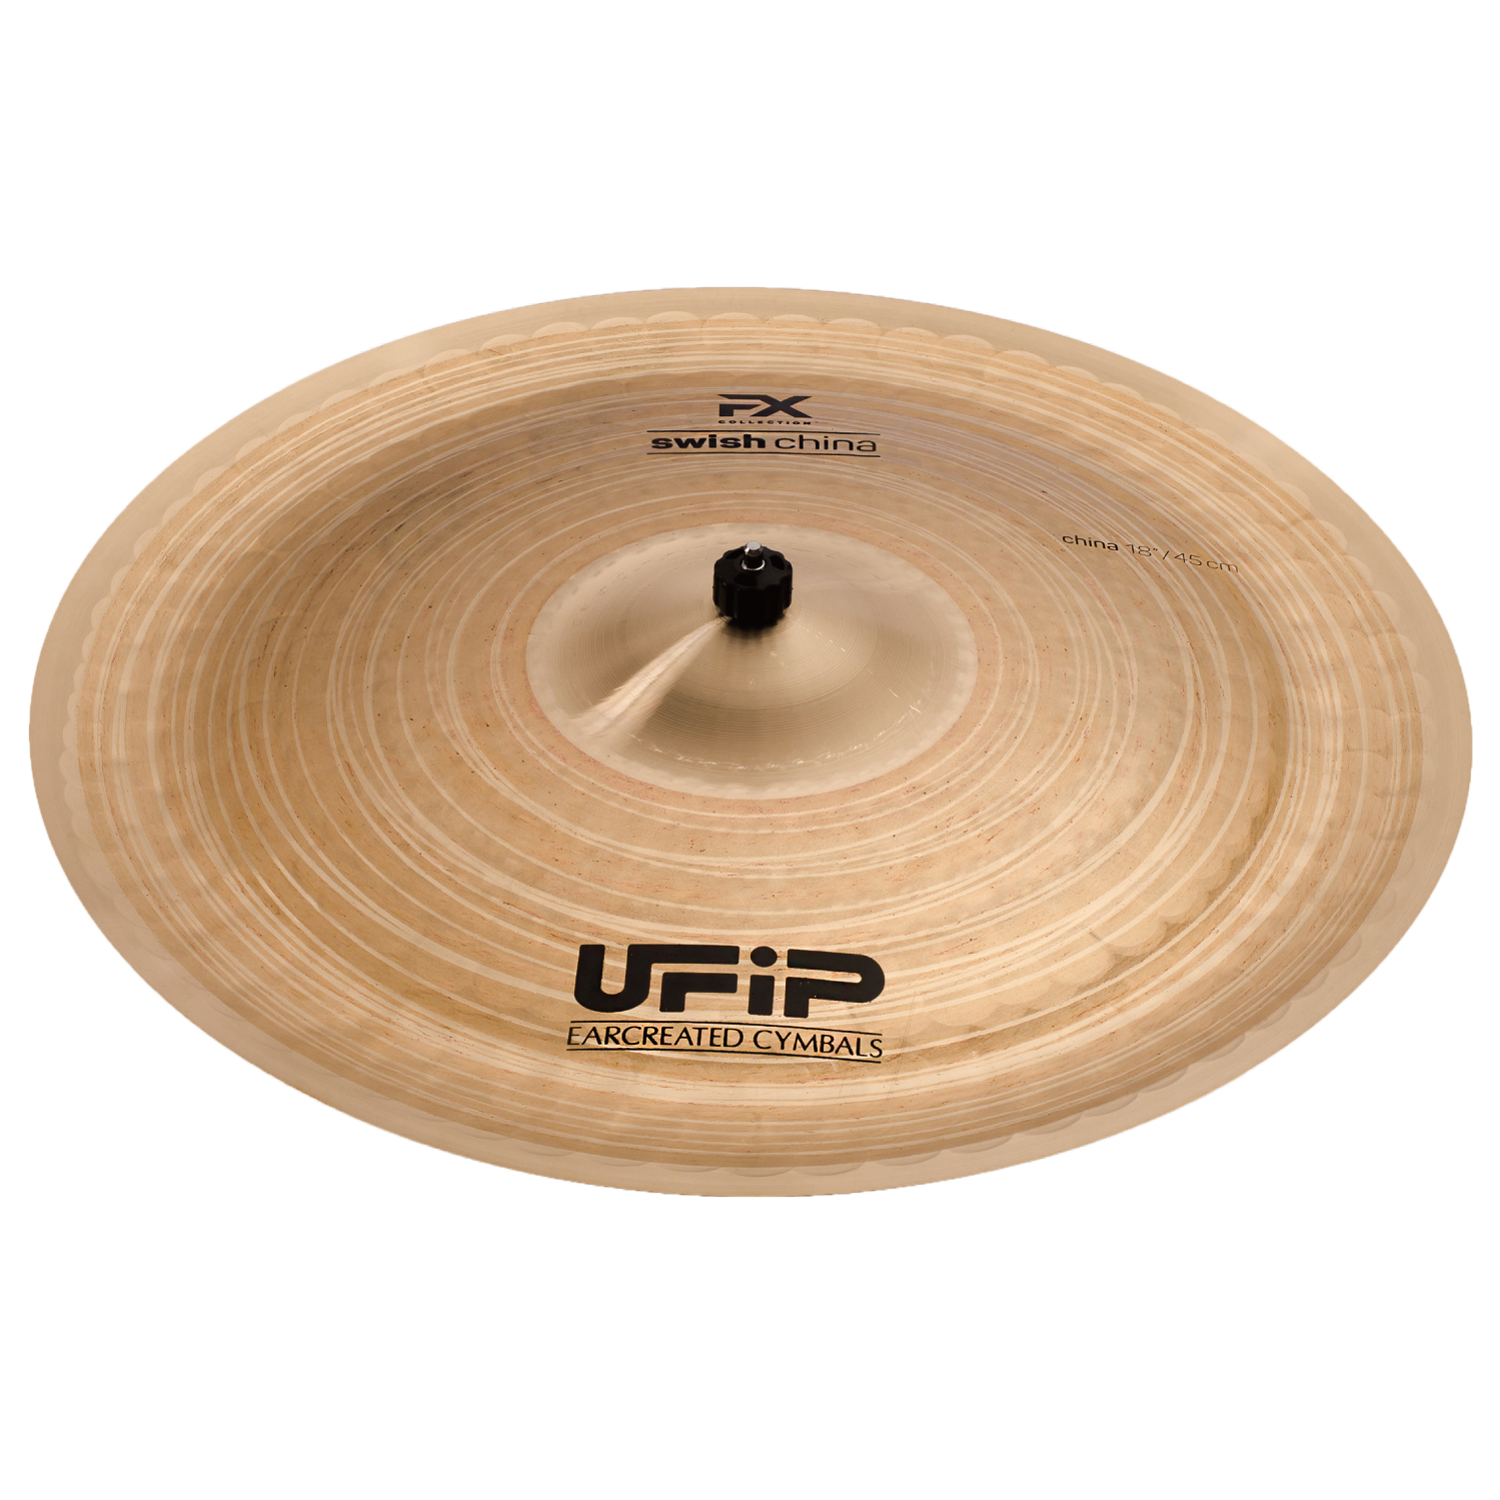 FX Collection-FXコレクション詳細 - UFiP CYMBAL